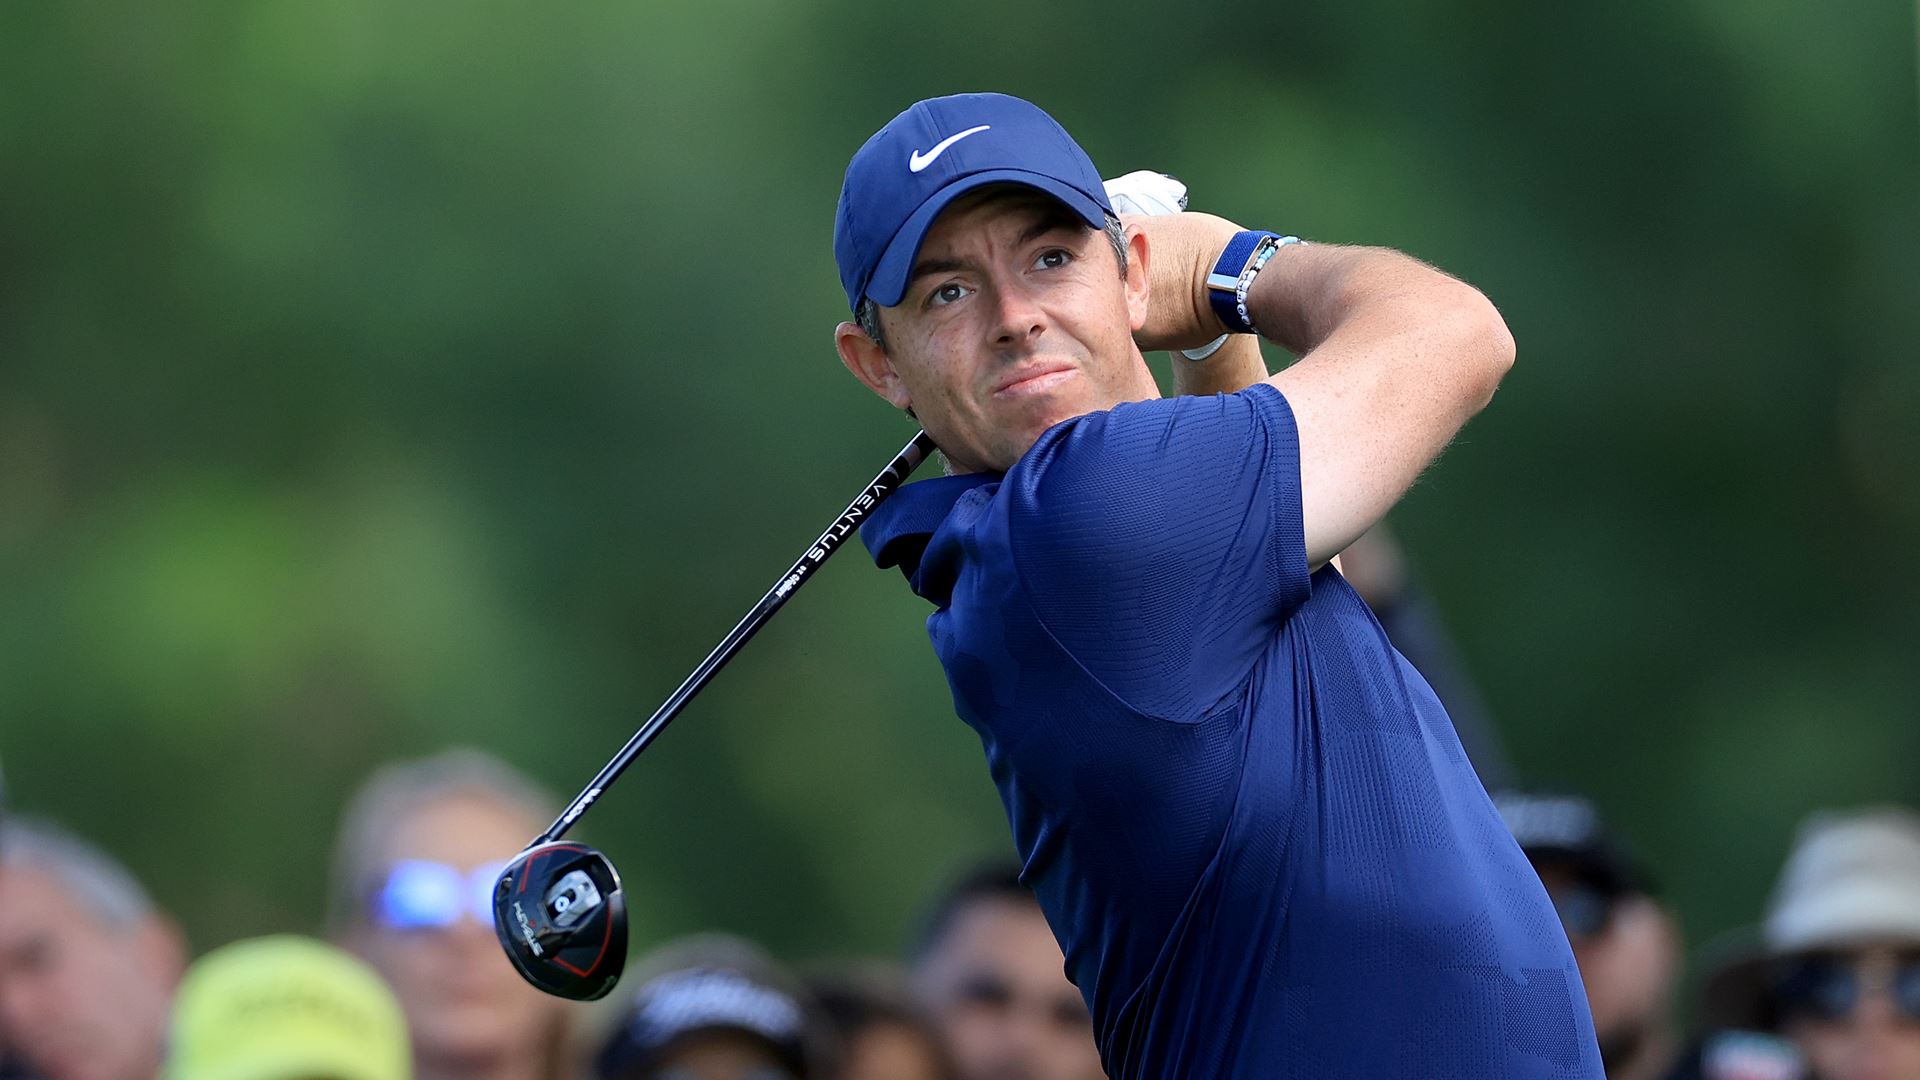 Rory McIlroy Claims Third Dubai Desert Classic and 15th DP World Tour Title with Stealth 2 Plus Fairway and TP5x Golf Ball